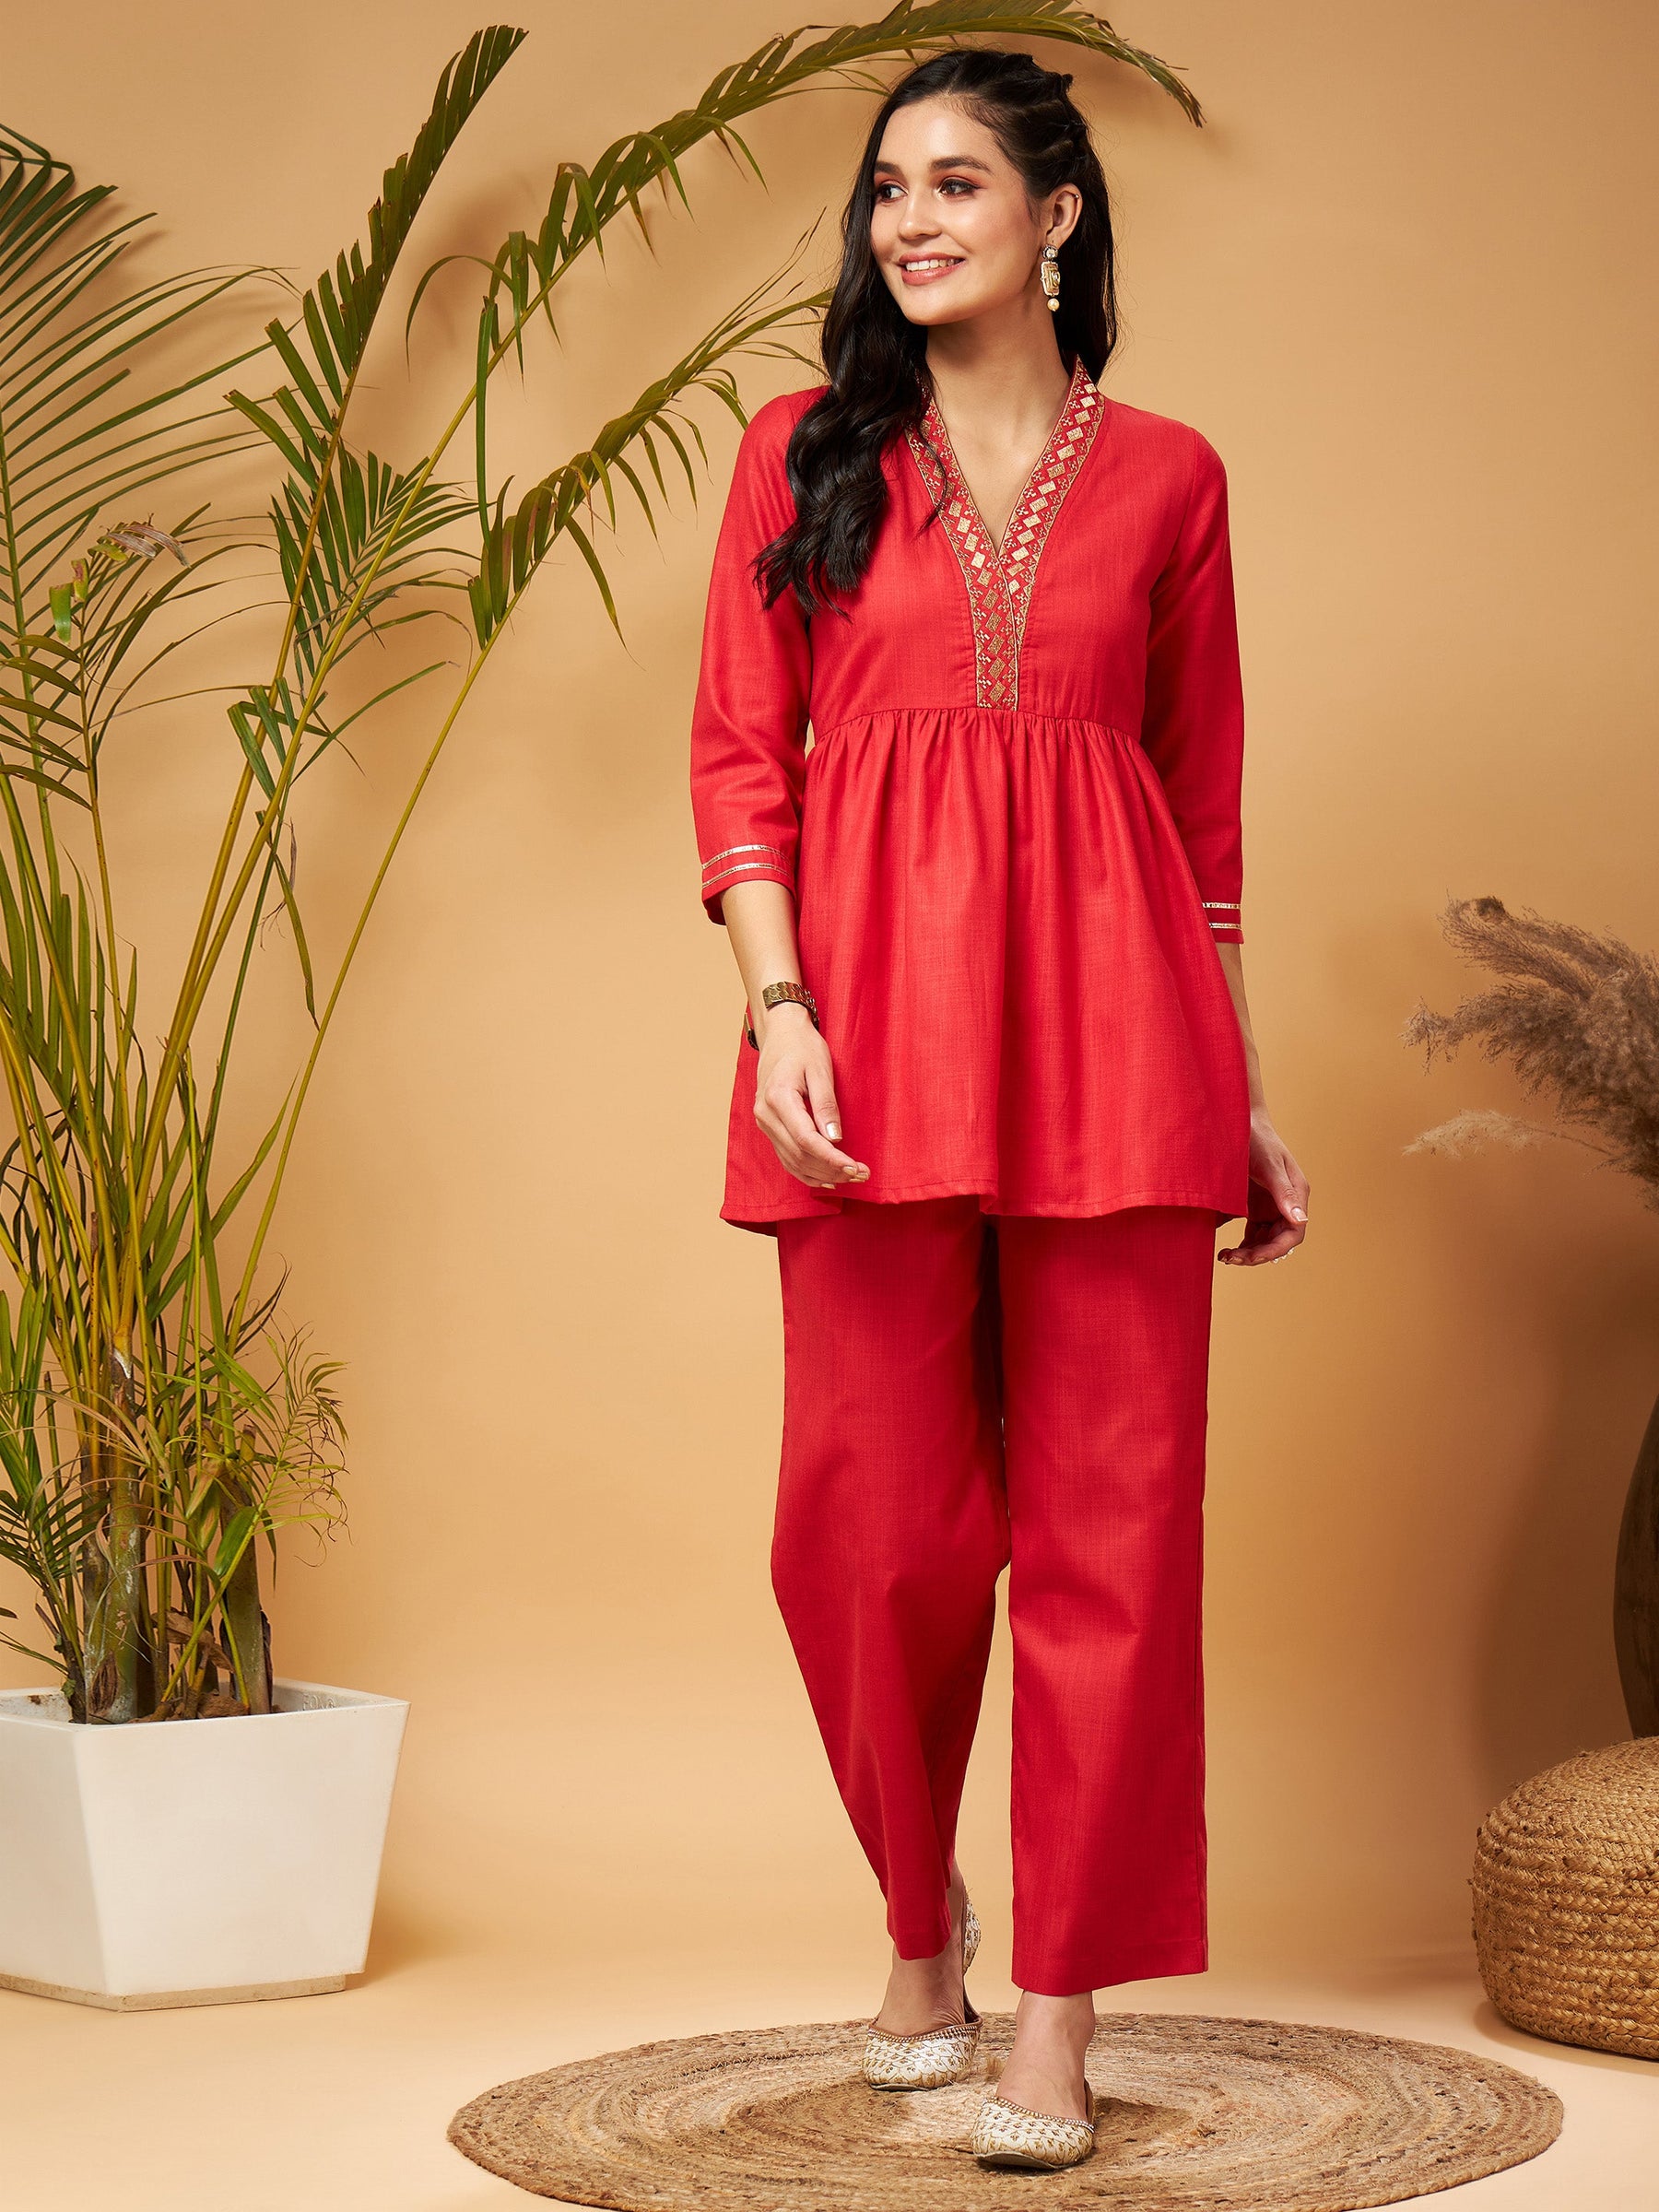 Buy Eid Dresses 2020 for Women in Stylish Design Online – Nameera by Farooq